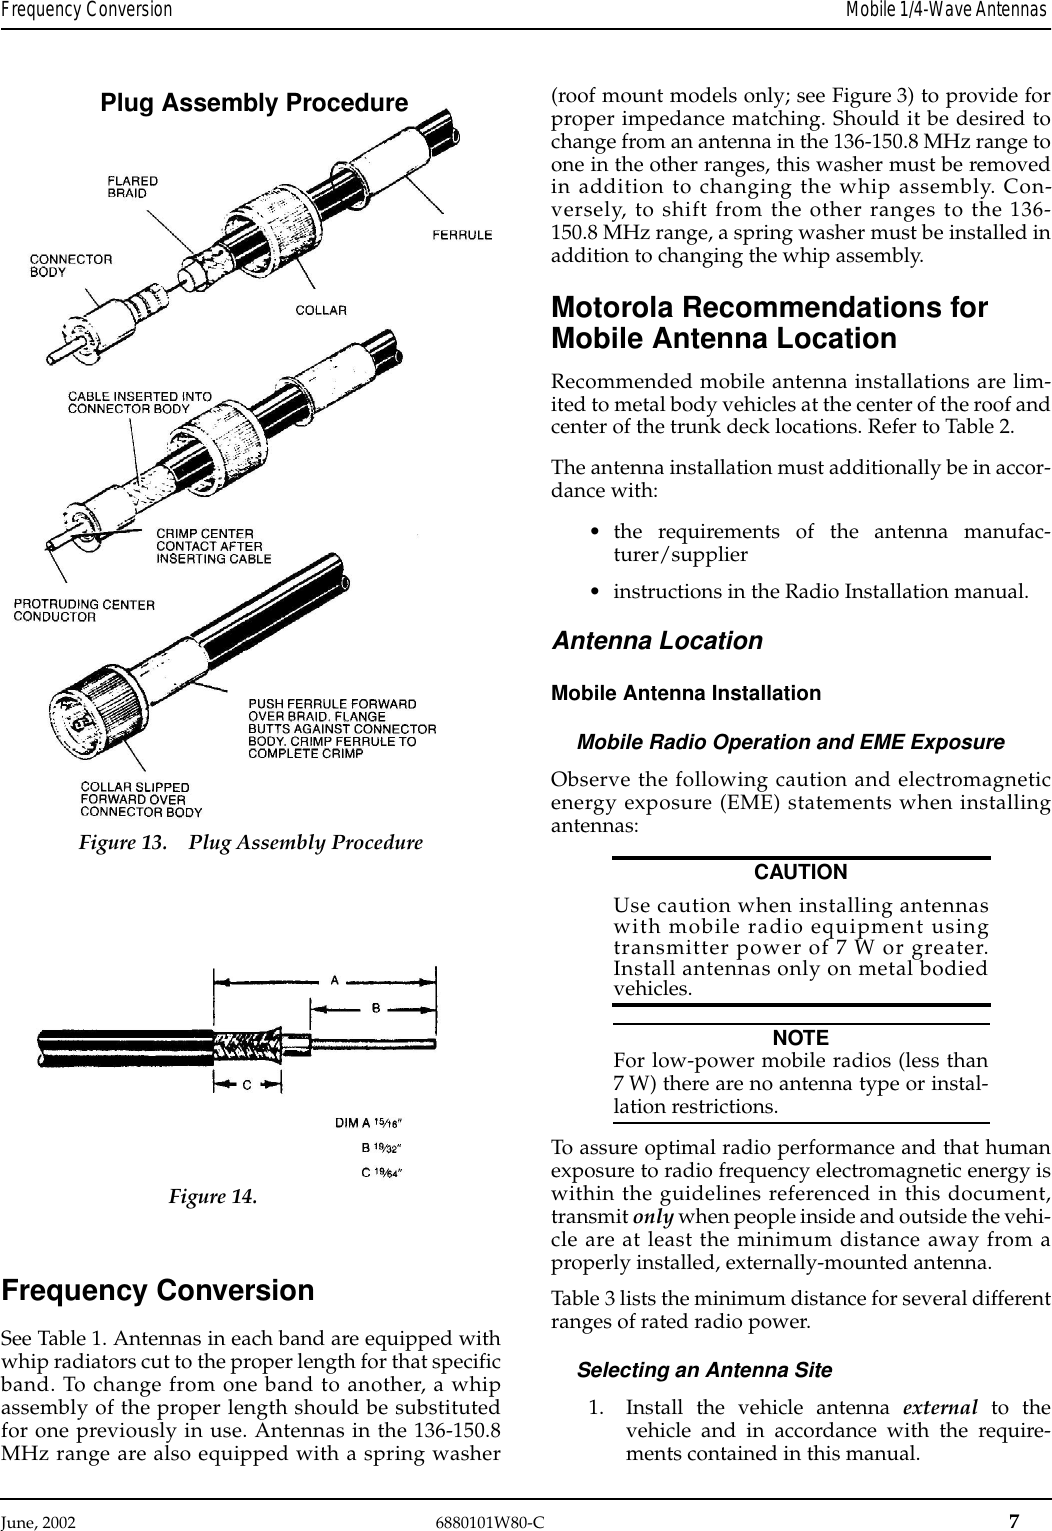 June, 2002   6880101W80-C  7Frequency Conversion Mobile 1/4-Wave Antennas Frequency ConversionSee Table 1. Antennas in each band are equipped withwhip radiators cut to the proper length for that specificband. To change from one band to another, a whipassembly of the proper length should be substitutedfor one previously in use. Antennas in the 136-150.8MHz range are also equipped with a spring washer(roof mount models only; see Figure 3) to provide forproper impedance matching. Should it be desired tochange from an antenna in the 136-150.8 MHz range toone in the other ranges, this washer must be removedin addition to changing the whip assembly. Con-versely, to shift from the other ranges to the 136-150.8 MHz range, a spring washer must be installed inaddition to changing the whip assembly.Motorola Recommendations for Mobile Antenna LocationRecommended mobile antenna installations are lim-ited to metal body vehicles at the center of the roof andcenter of the trunk deck locations. Refer to Table 2.The antenna installation must additionally be in accor-dance with:•the requirements of the antenna manufac-turer/supplier•instructions in the Radio Installation manual.Antenna LocationMobile Antenna InstallationMobile Radio Operation and EME ExposureObserve the following caution and electromagneticenergy exposure (EME) statements when installingantennas:CAUTIONUse caution when installing antennaswith mobile radio equipment usingtransmitter power of 7 W or greater.Install antennas only on metal bodiedvehicles.NOTEFor low-power mobile radios (less than7 W) there are no antenna type or instal-lation restrictions.To assure optimal radio performance and that humanexposure to radio frequency electromagnetic energy iswithin the guidelines referenced in this document,transmit only when people inside and outside the vehi-cle are at least the minimum distance away from aproperly installed, externally-mounted antenna.Table 3 lists the minimum distance for several differentranges of rated radio power.Selecting an Antenna Site1. Install the vehicle antenna external  to thevehicle and in accordance with the require-ments contained in this manual.Plug Assembly ProcedureFigure 13. Plug Assembly ProcedureFigure 14.